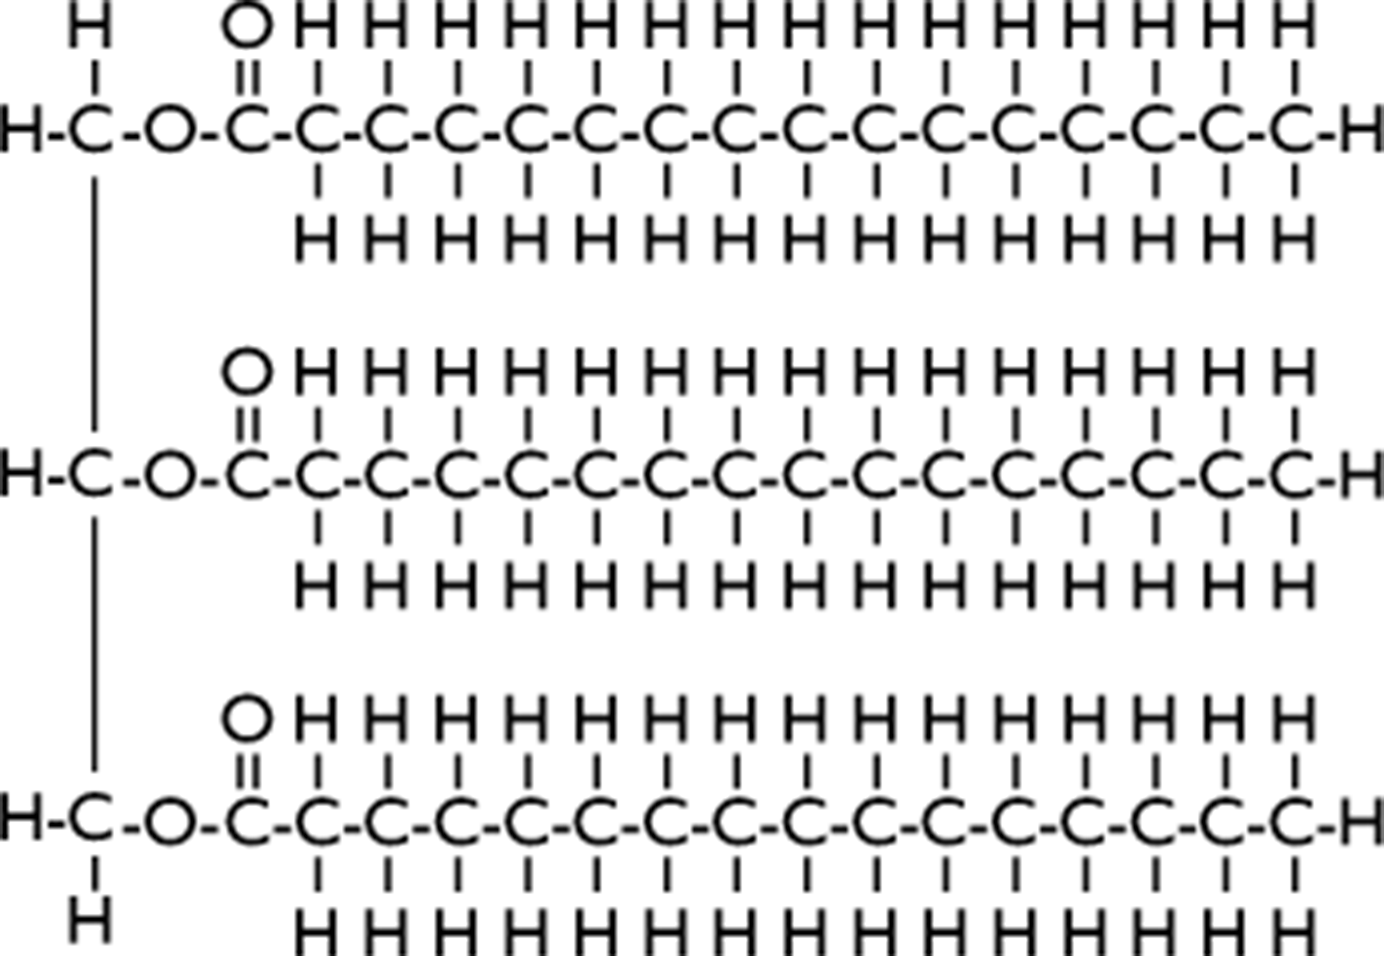 The chemical bonds of a tri-glyceride with a carbon-carbon double bond in each of its fatty acids.